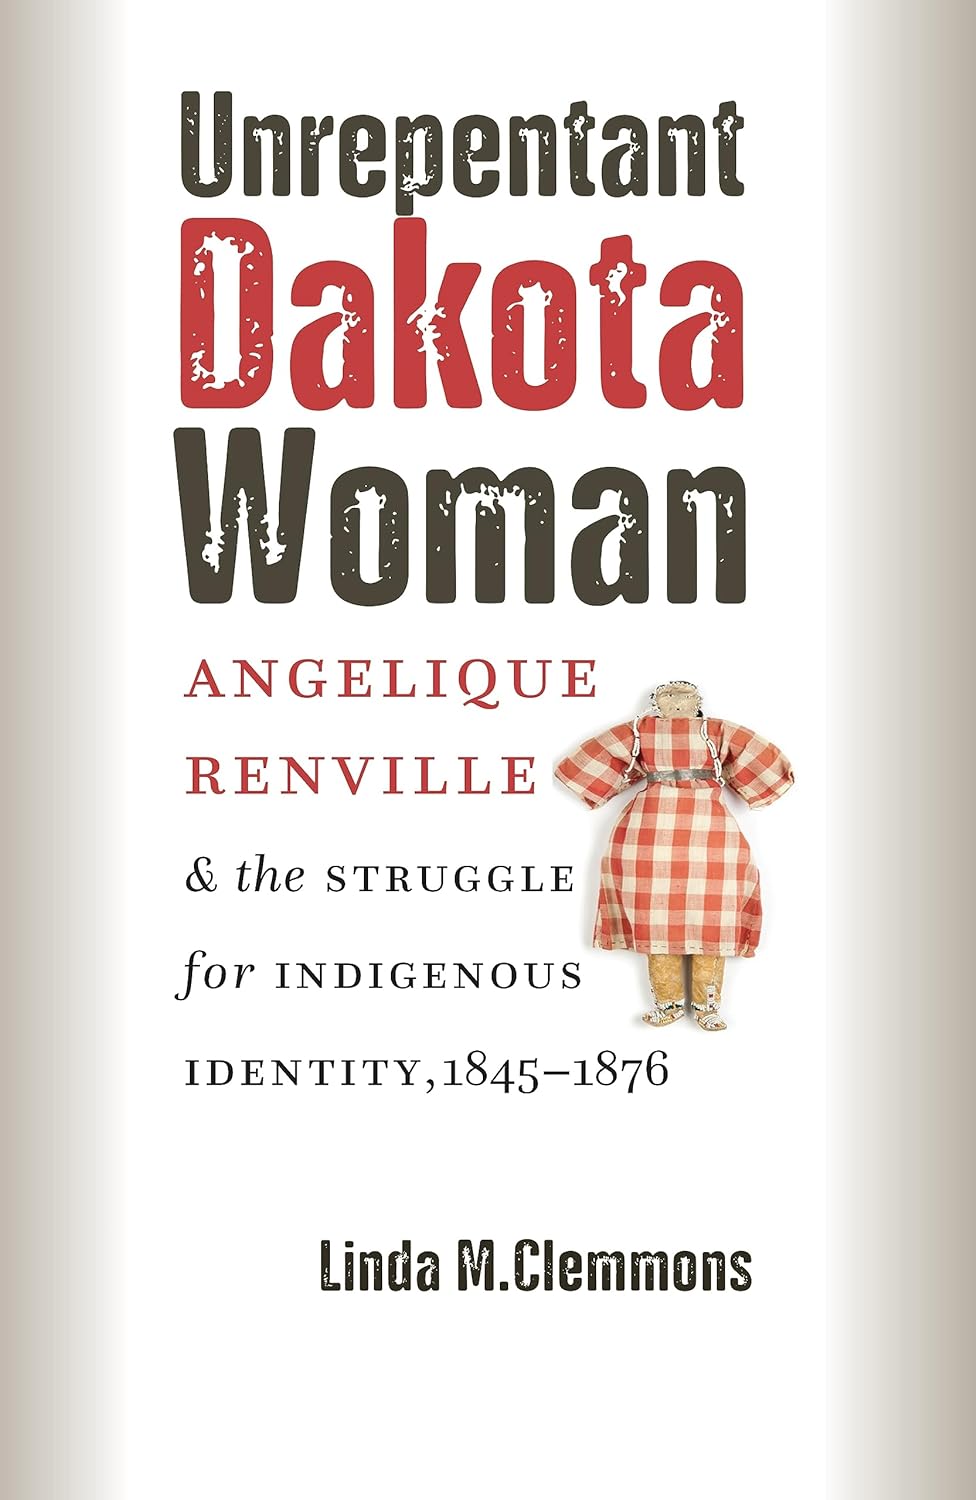 Unrepentant Dakota Woman: Angelique Renville & the Struggle for Indigenous Identity, 1845 - 1876 by Linda M. Clemmons